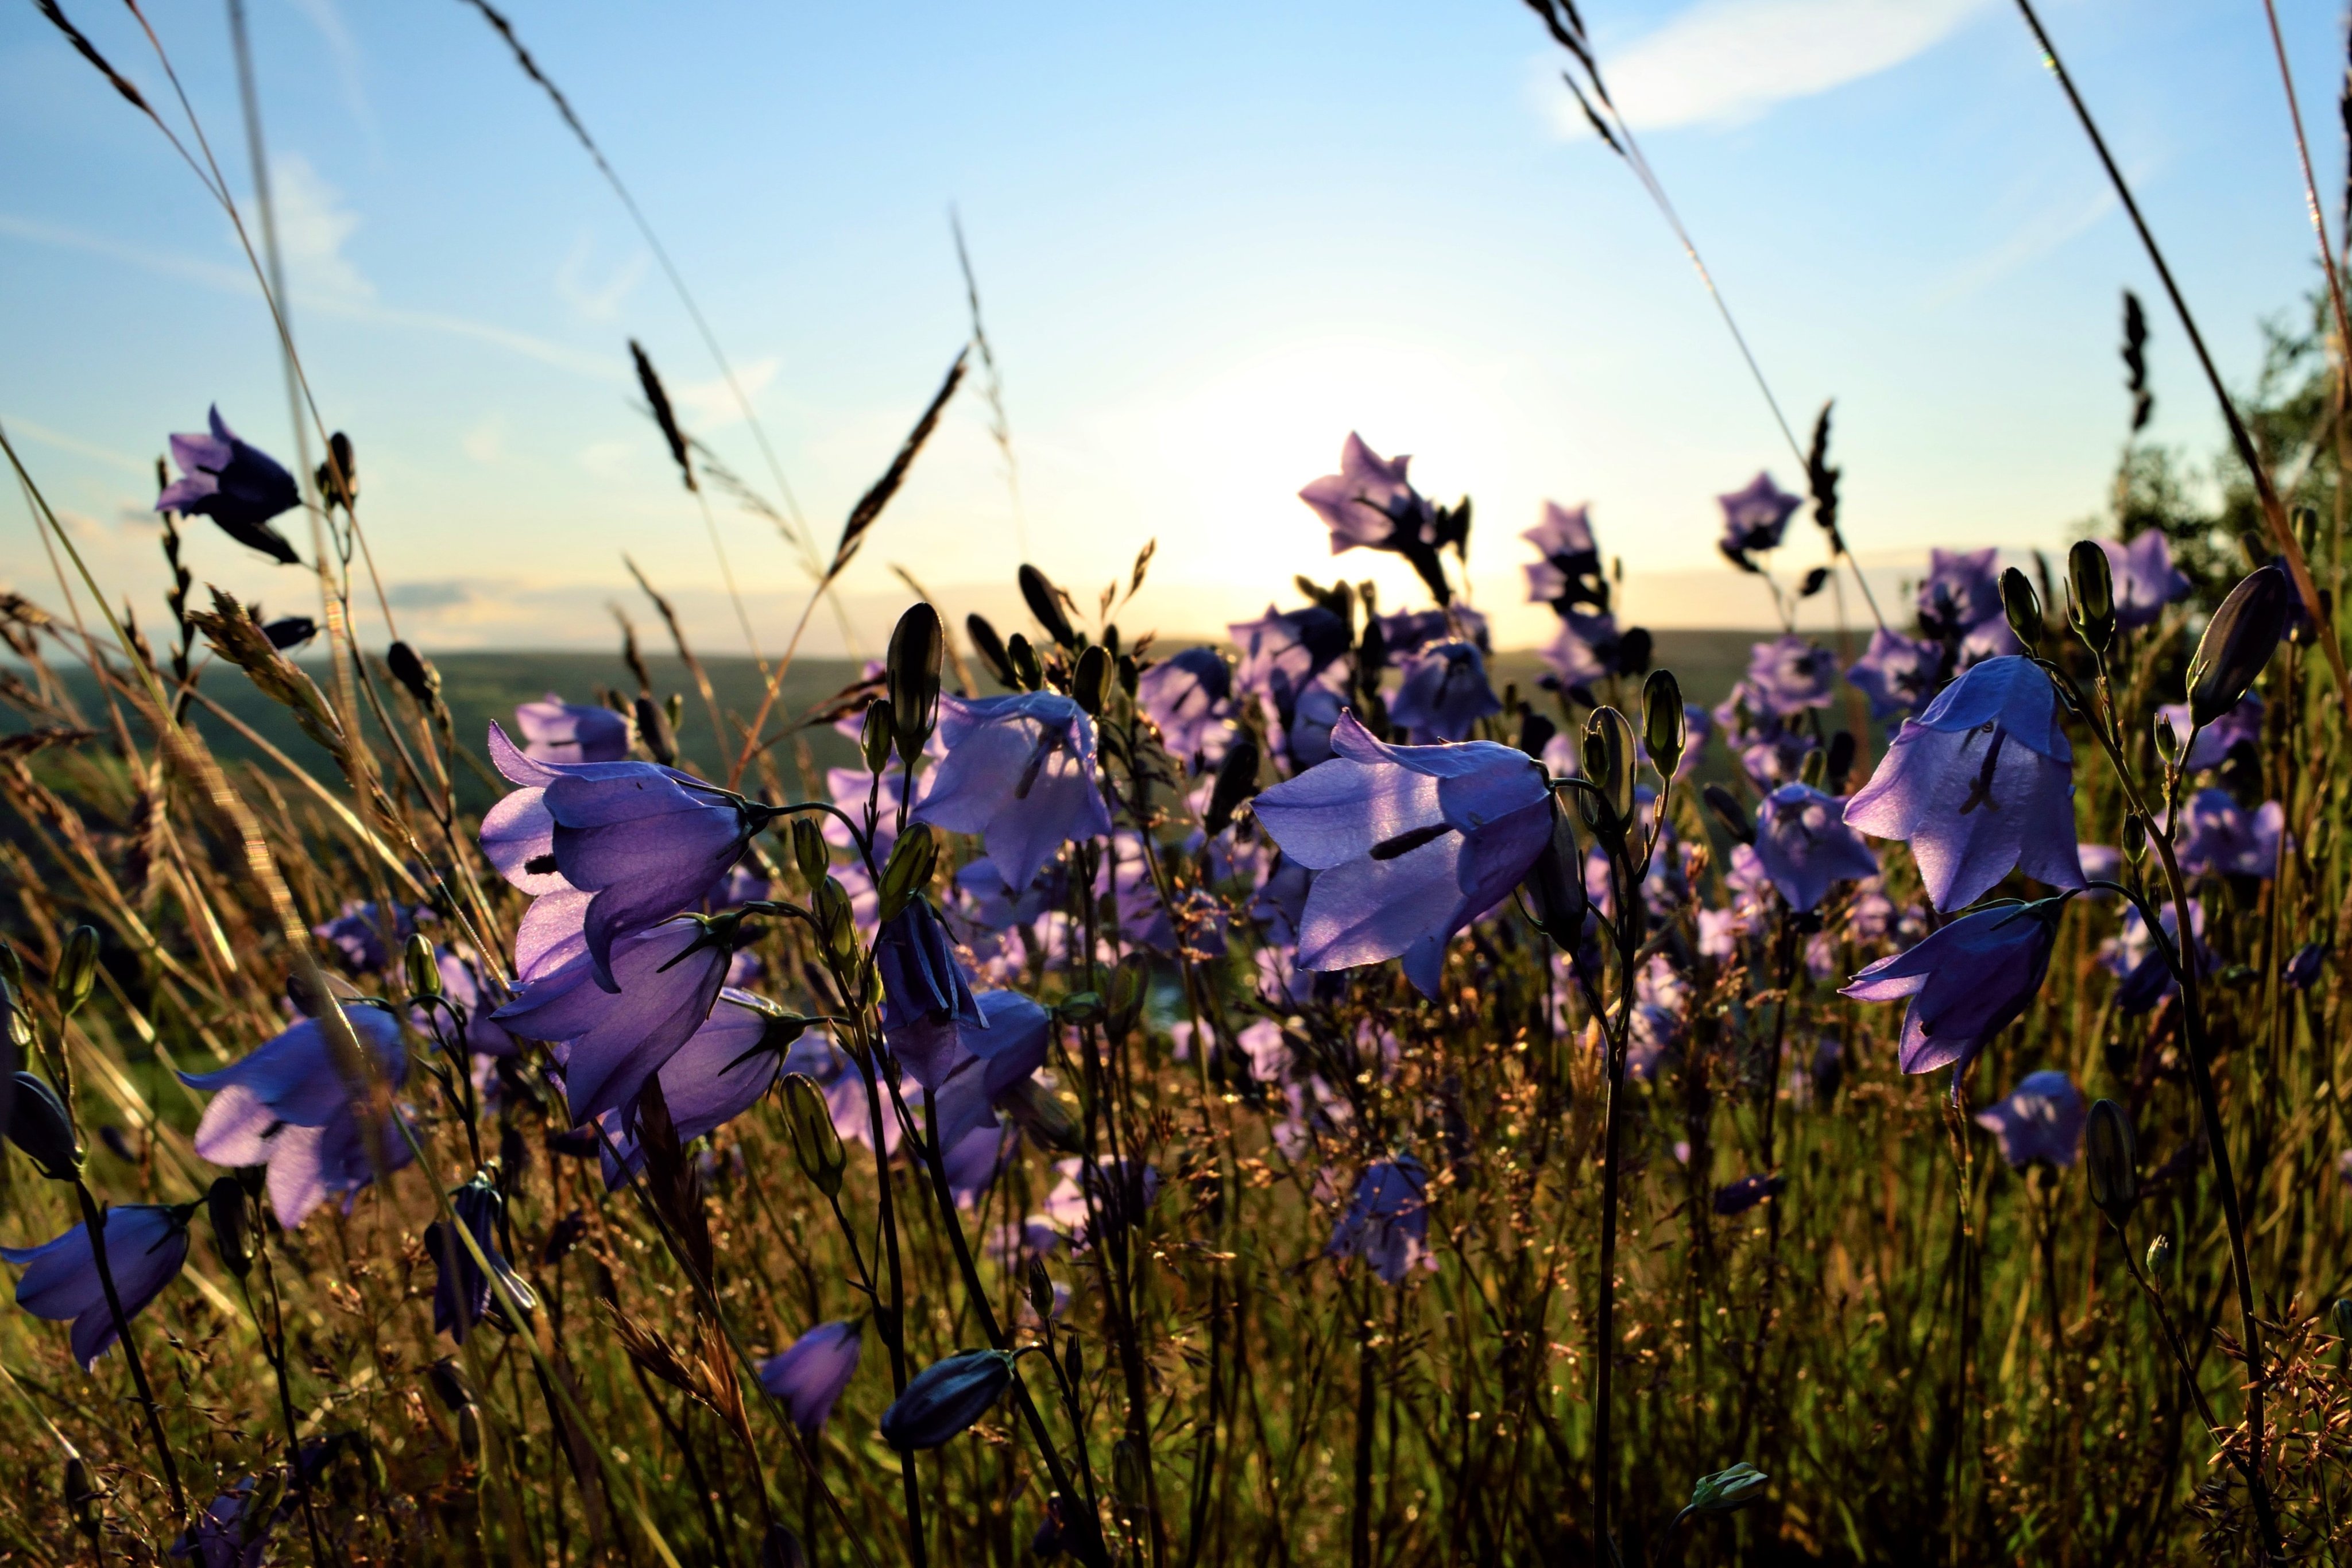 2nd Place Beautiful Bellflowers backlit by the setting sun in Huddersfield, West Yorkshire by Jane Brook @jayceb19